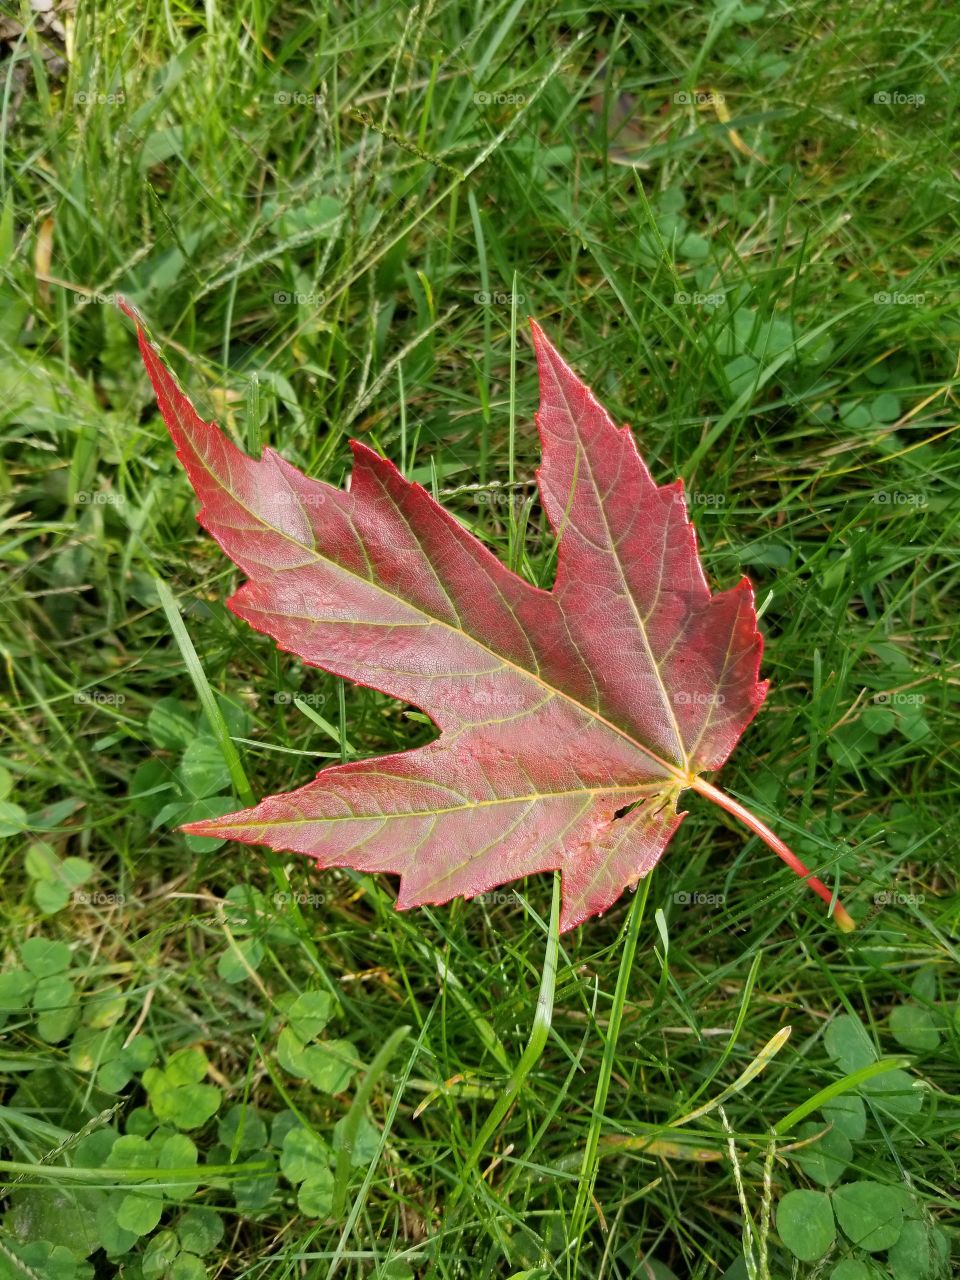 Maple leaf. Fallen from our tree out back.